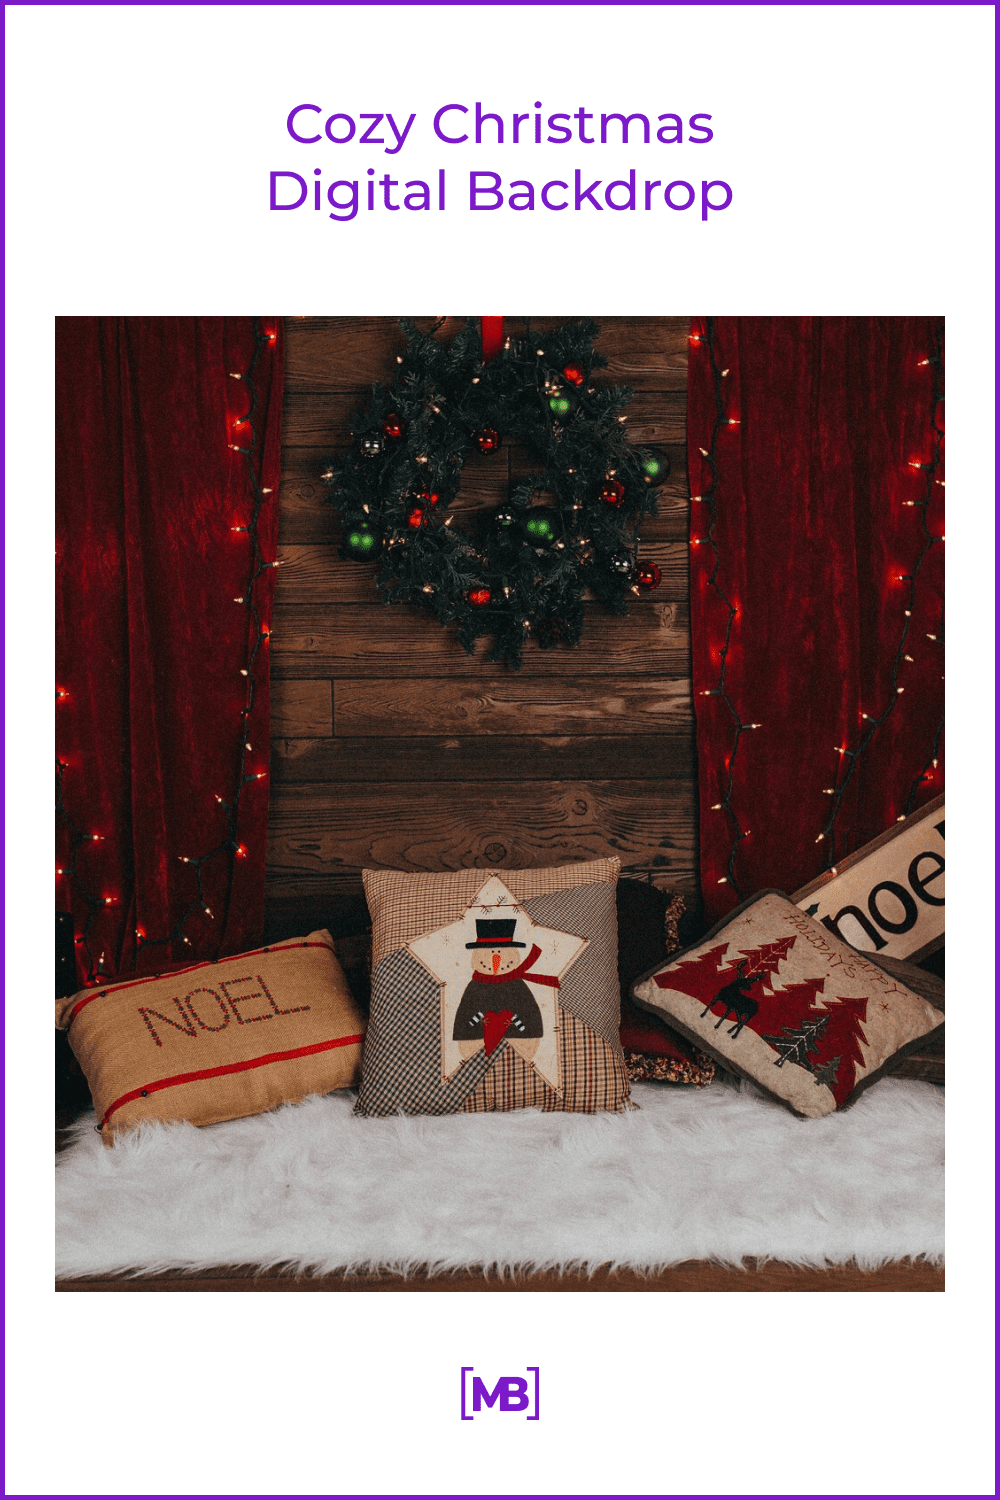 cozy corner with fluffy white carpet, Christmas pillow, wreath, red curtains on wooden background.